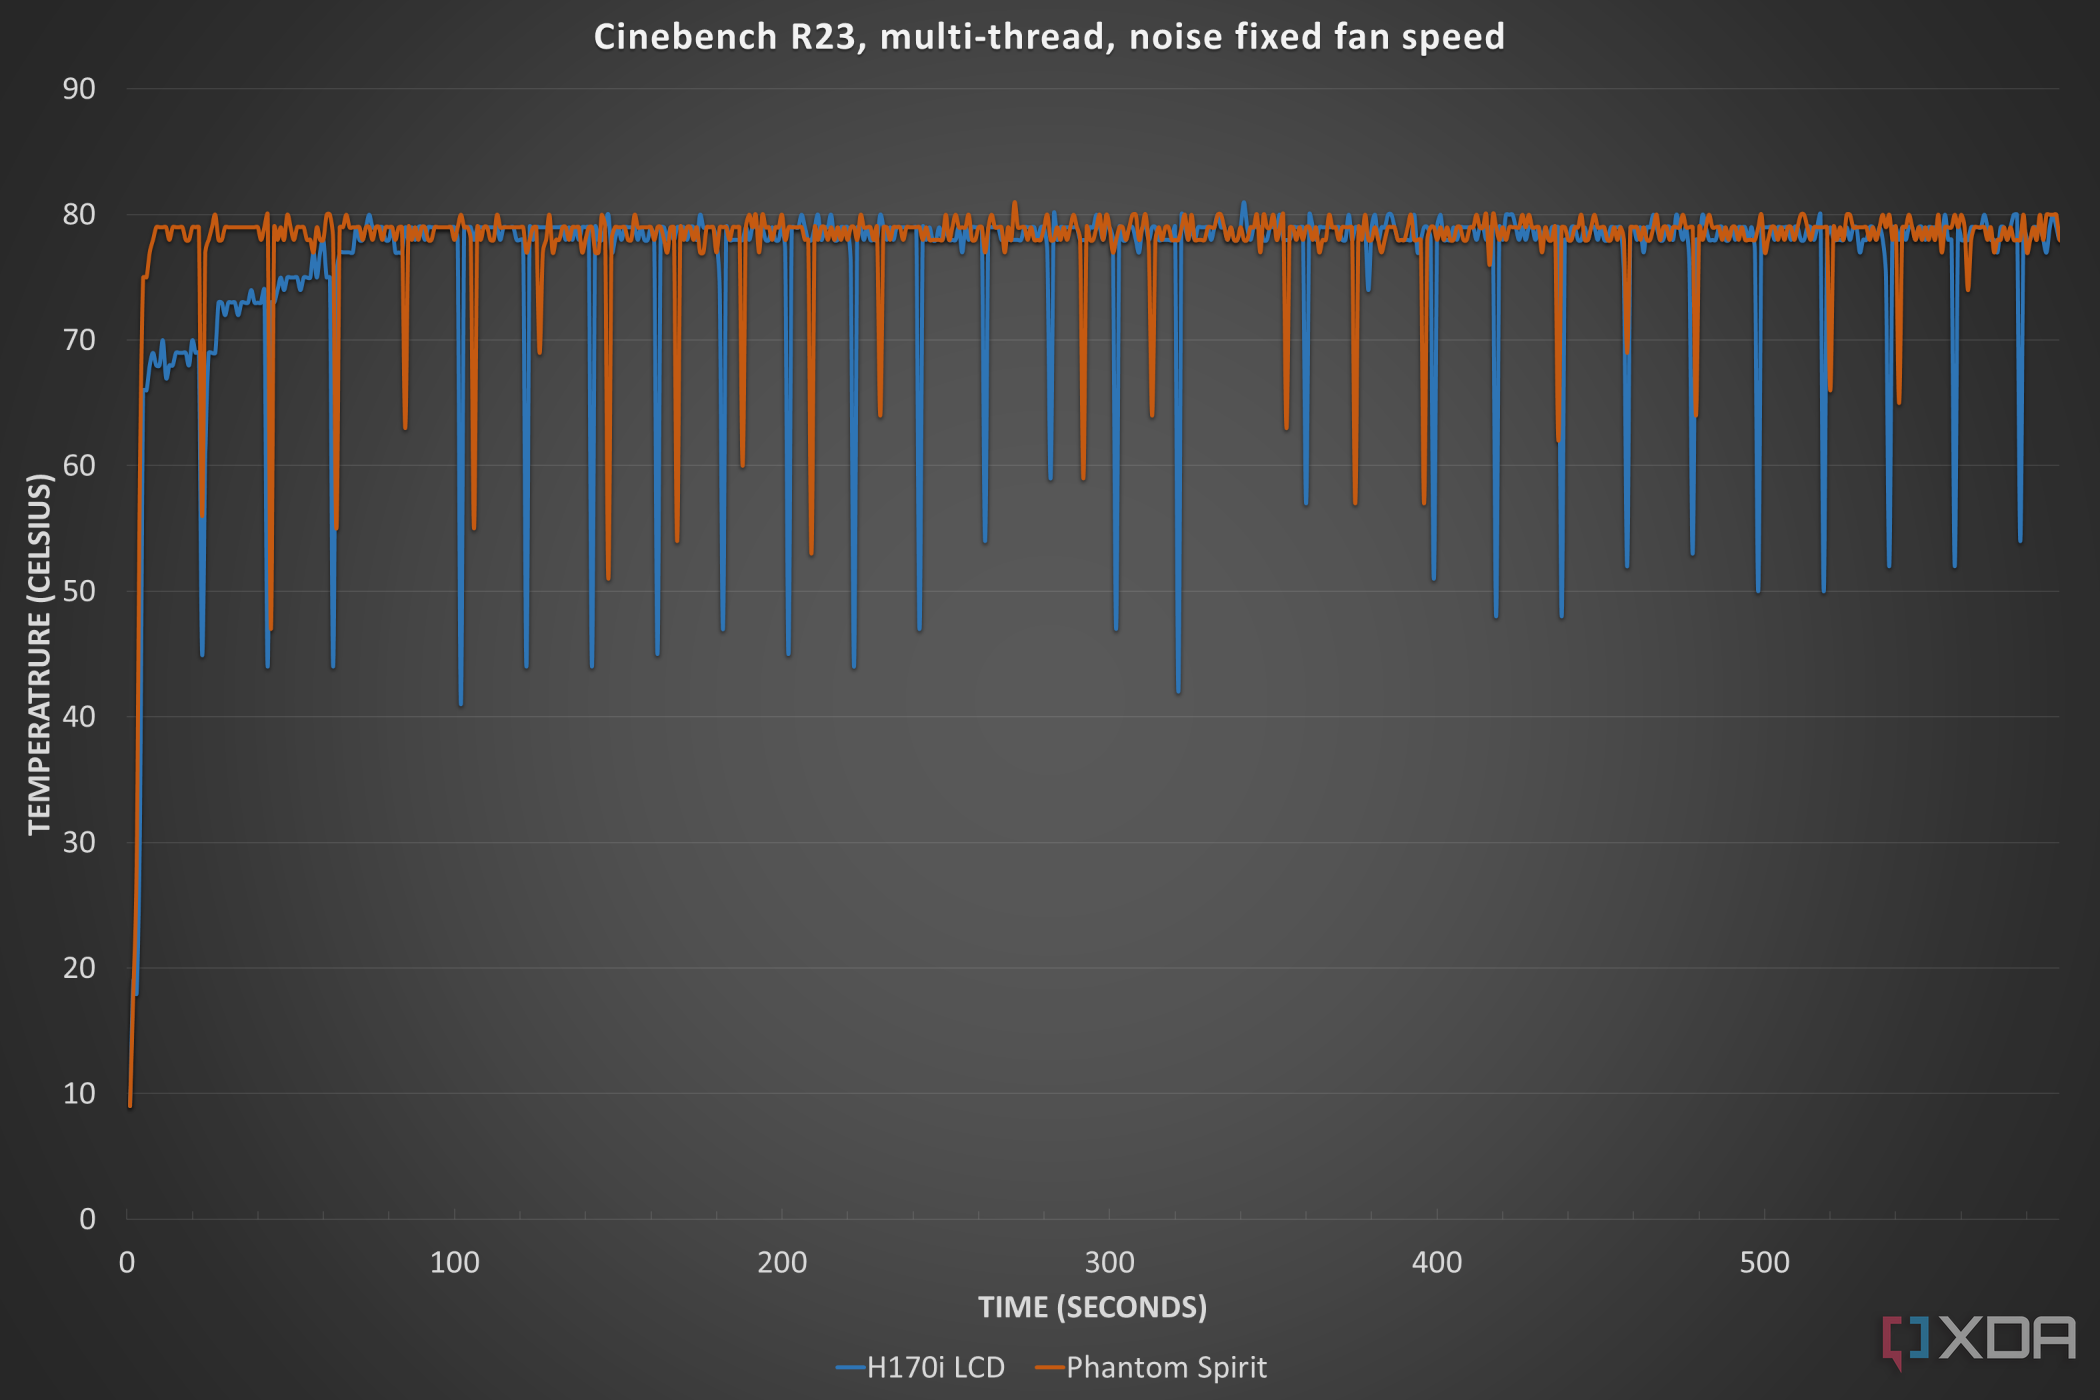 Corsair iCUE Link H170i LCD thermal performance in Cinebench R23.